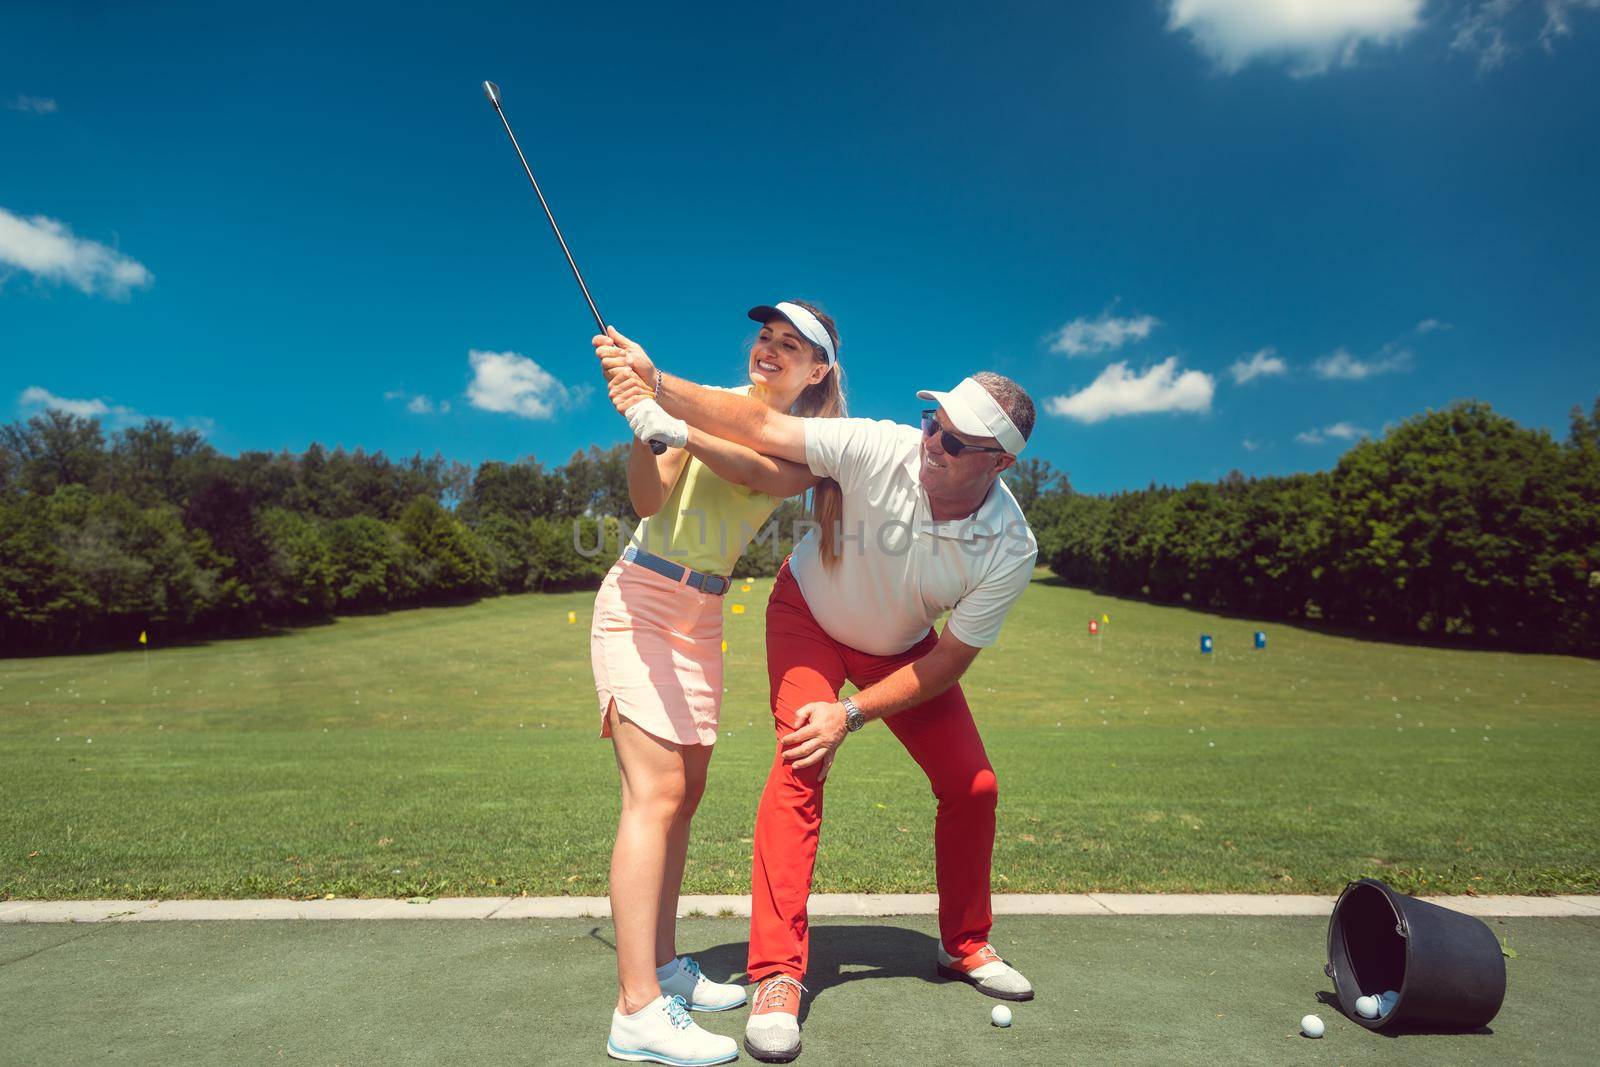 Golf pro teaching a woman student of the driving range by Kzenon